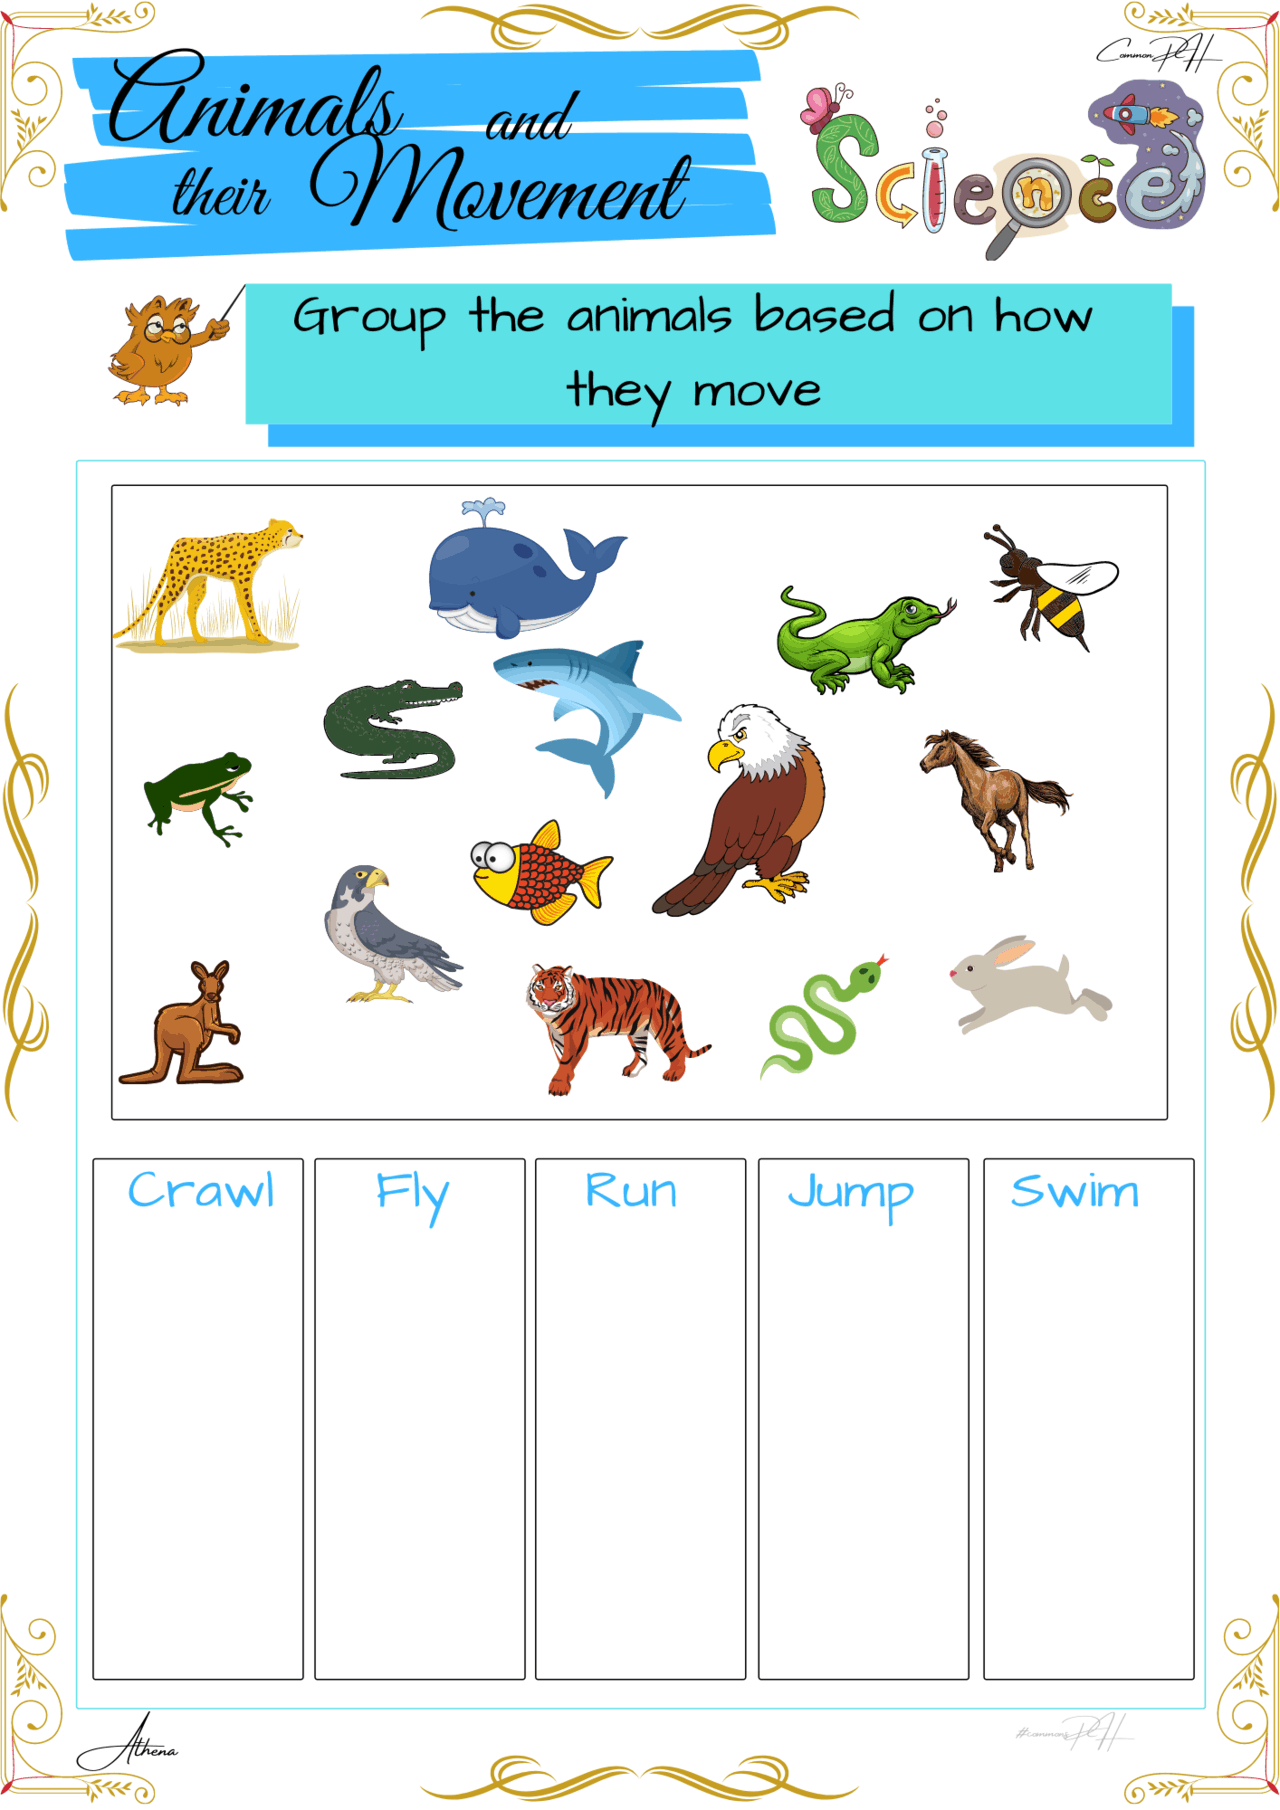 grade-1-science-worksheet-how-animals-move